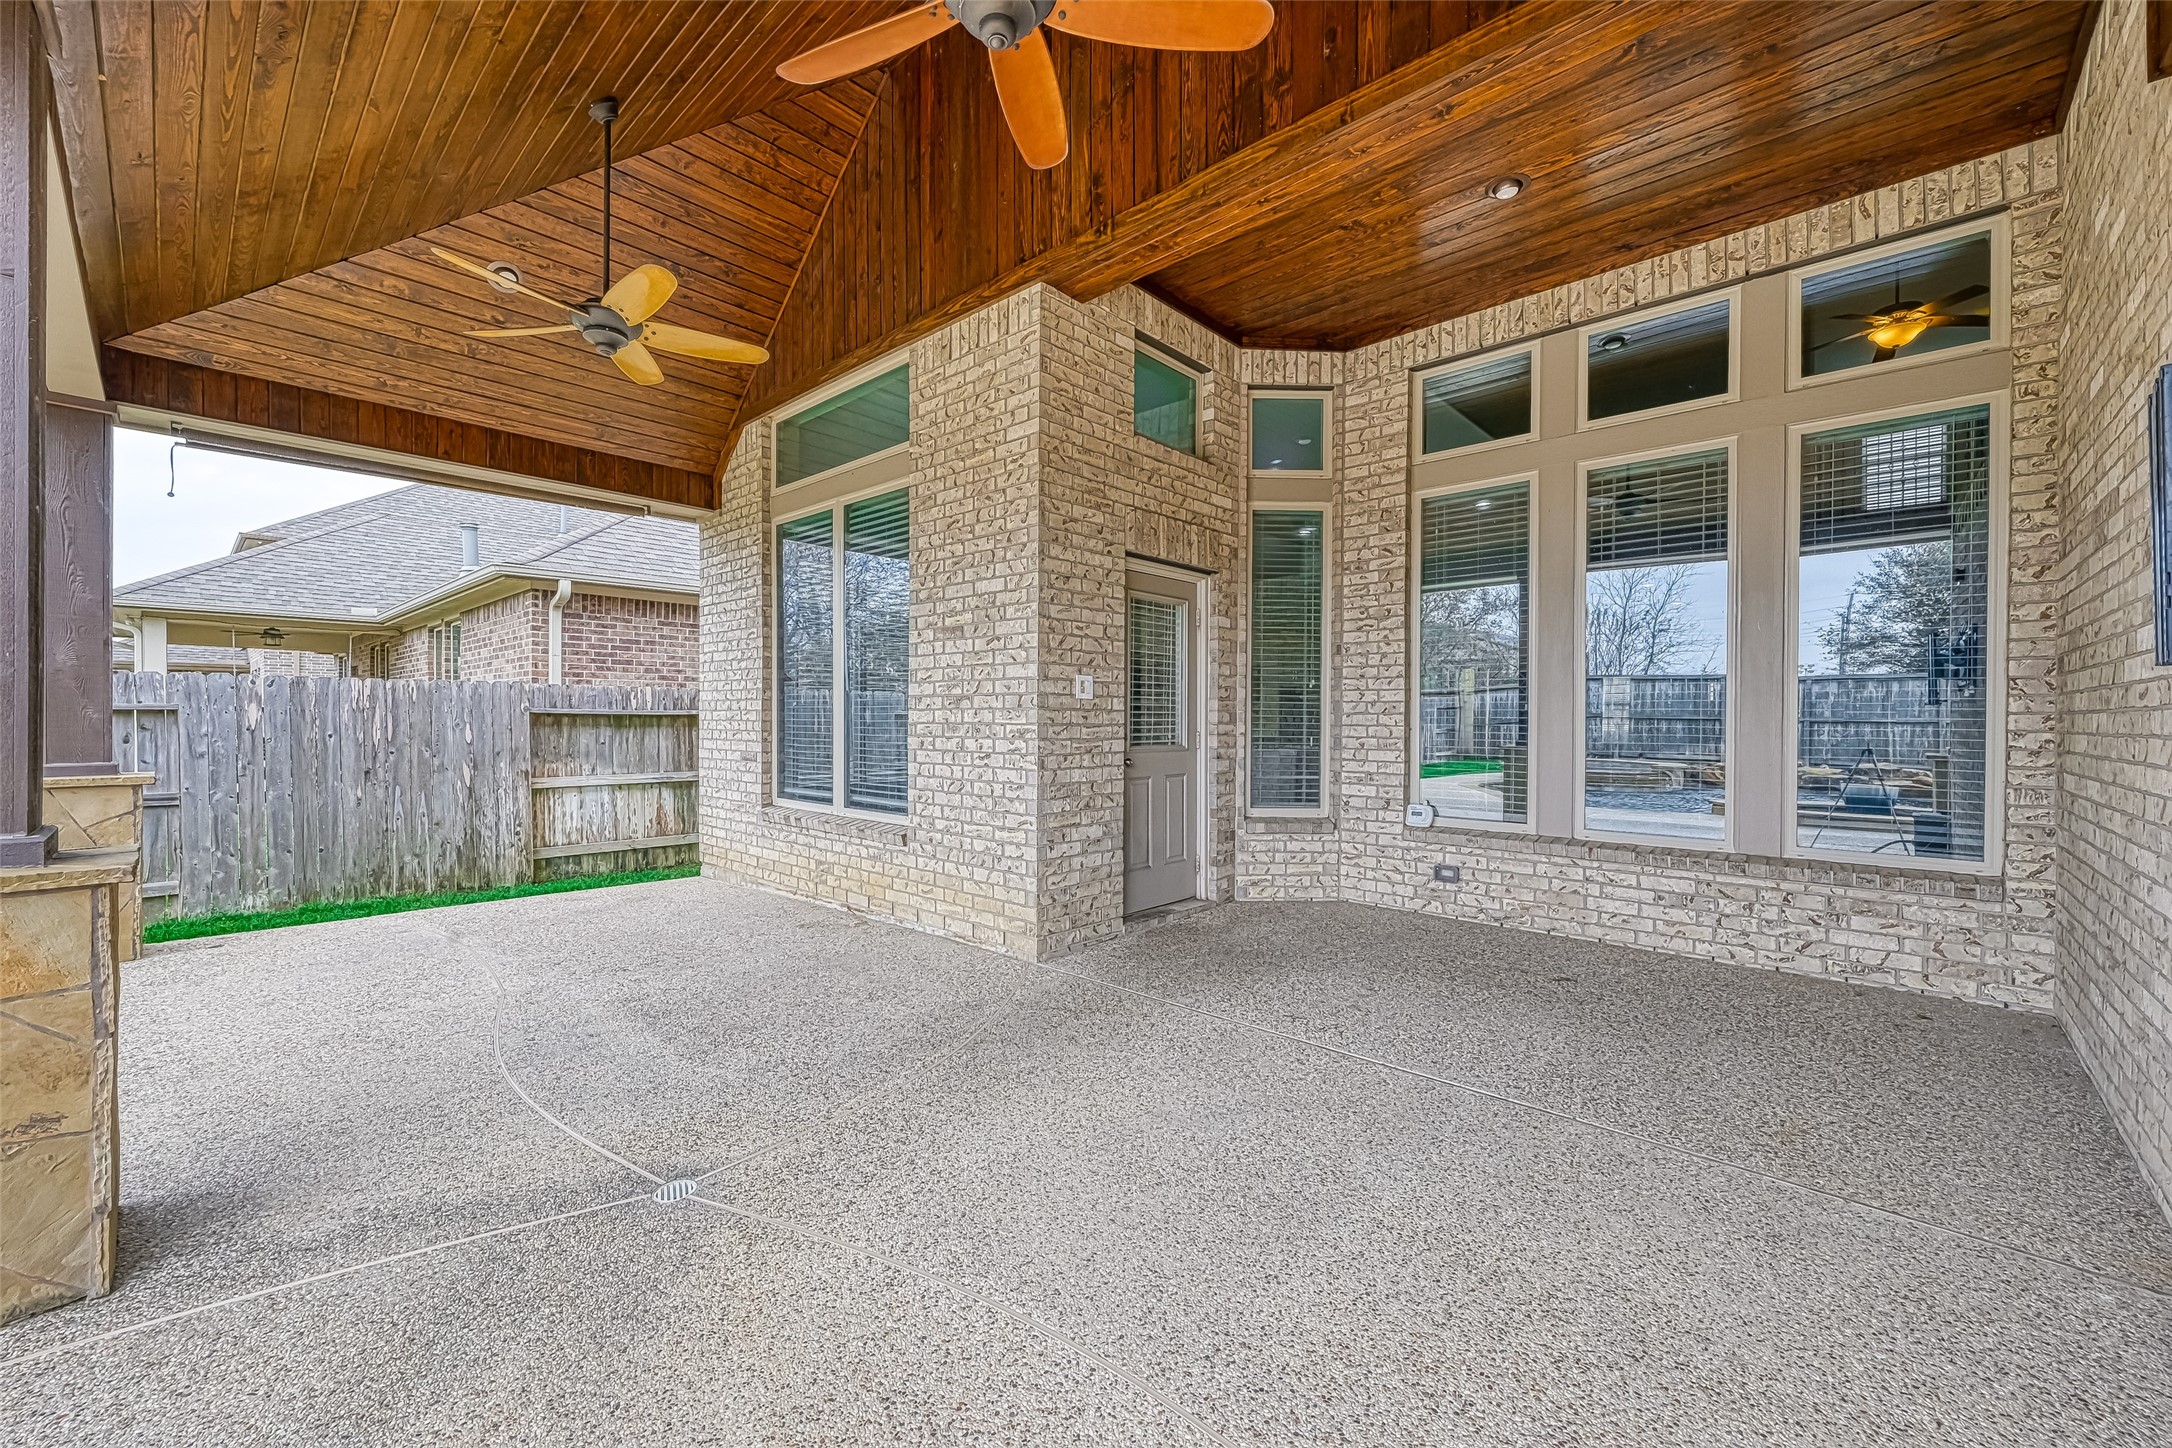 Awesome covered back patio with wood  ceiling and fans to stay cool on those hot summer days.